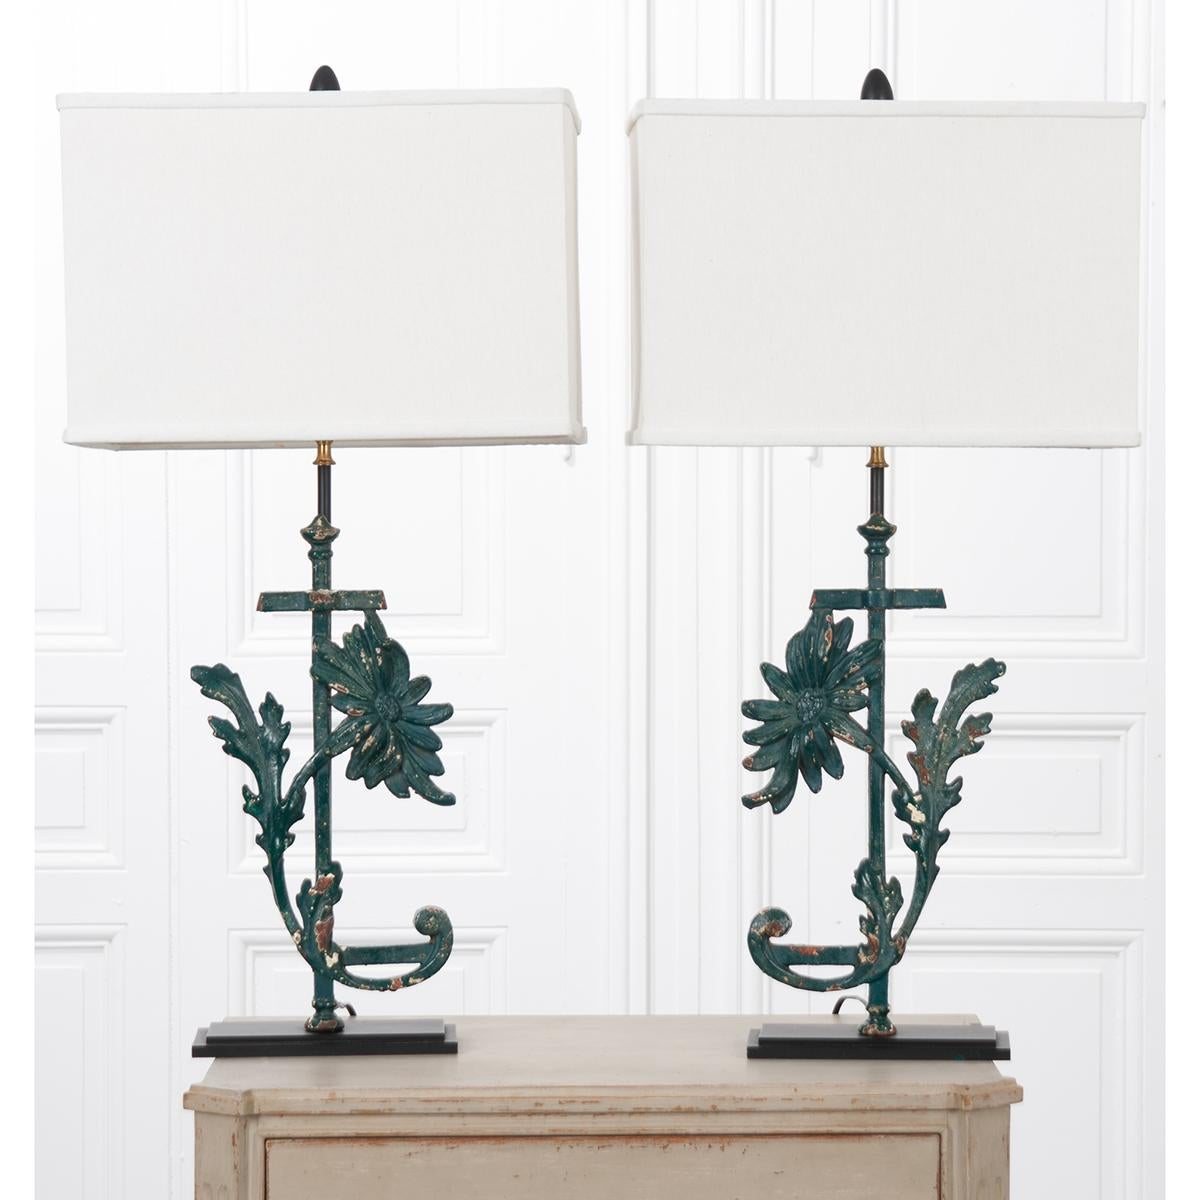 A beautiful pair of custom lamps made from decorative painted iron segments that have been mounted to a base and rod to create an extraordinary pair of lighting fixtures. The lamps are mirror images of a flower and leaf motif in a dark green color